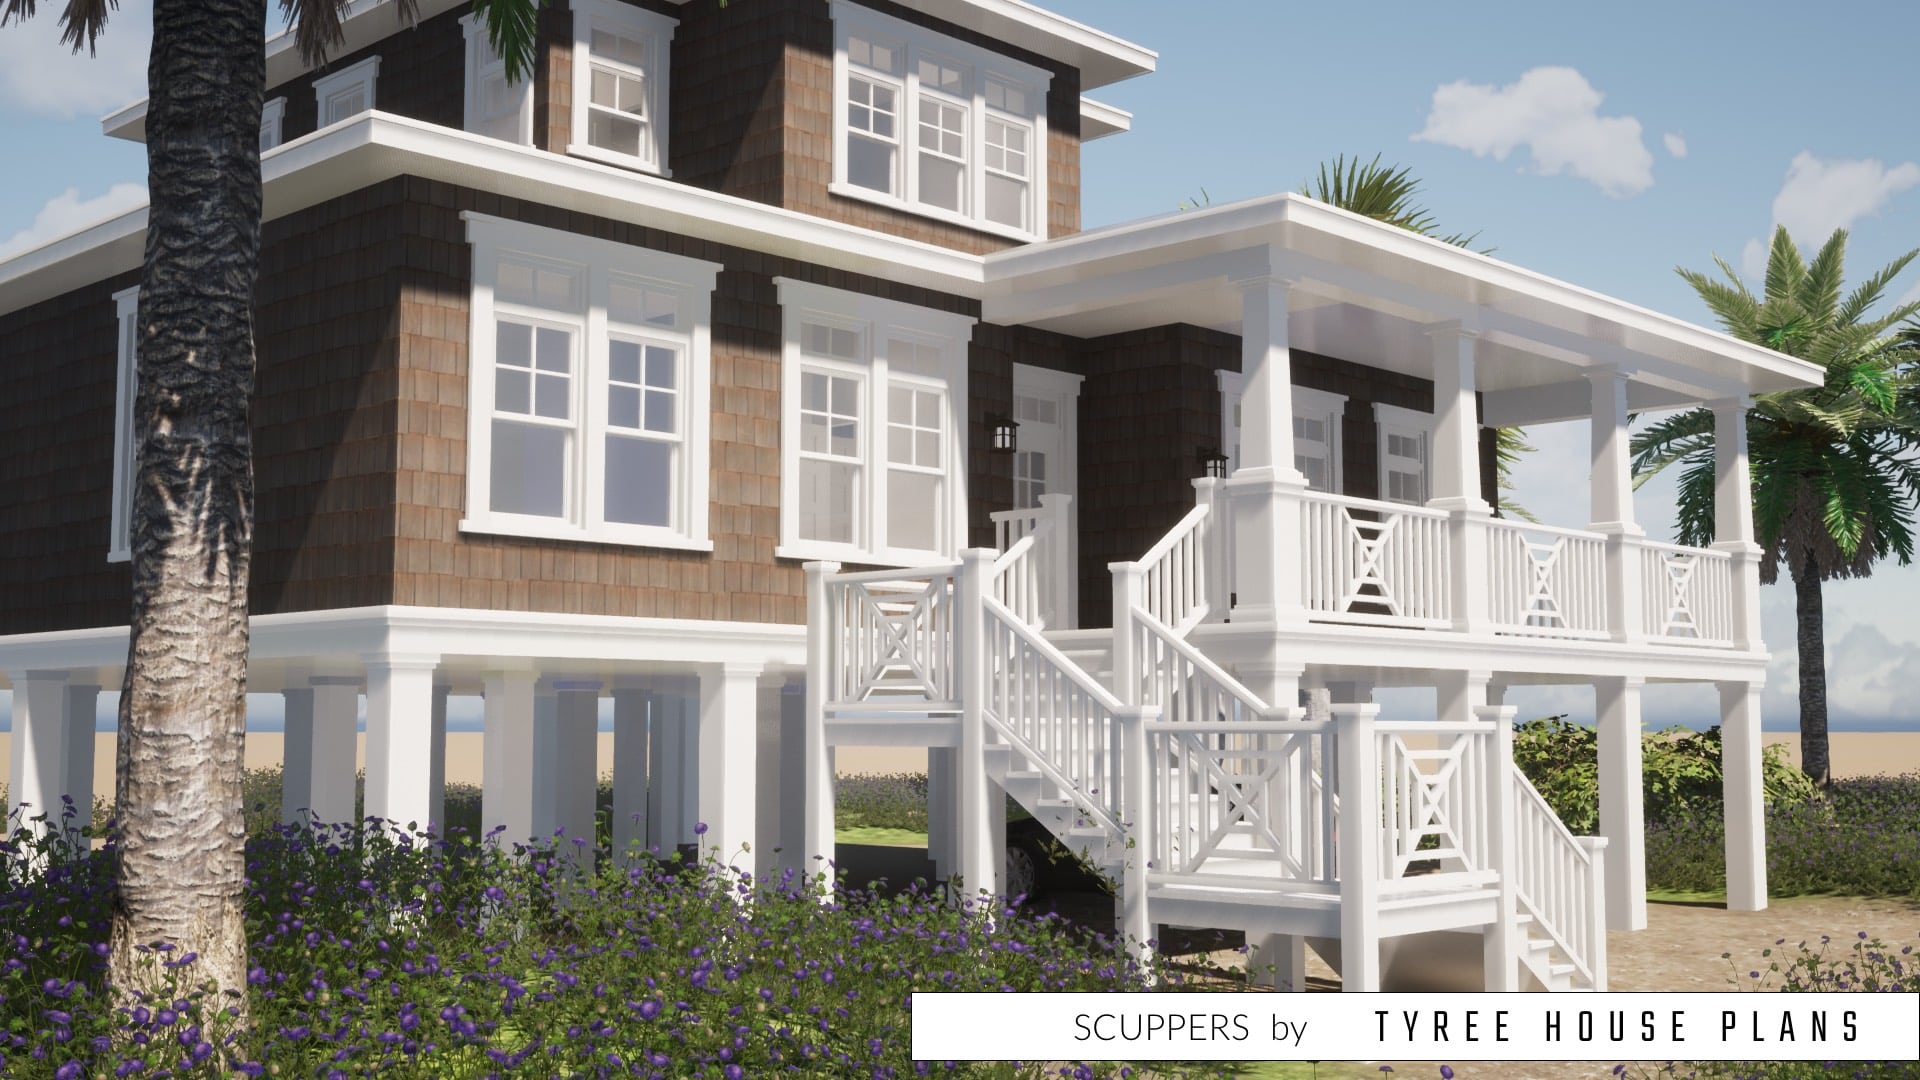 Scuppers by Tyree House Plans.